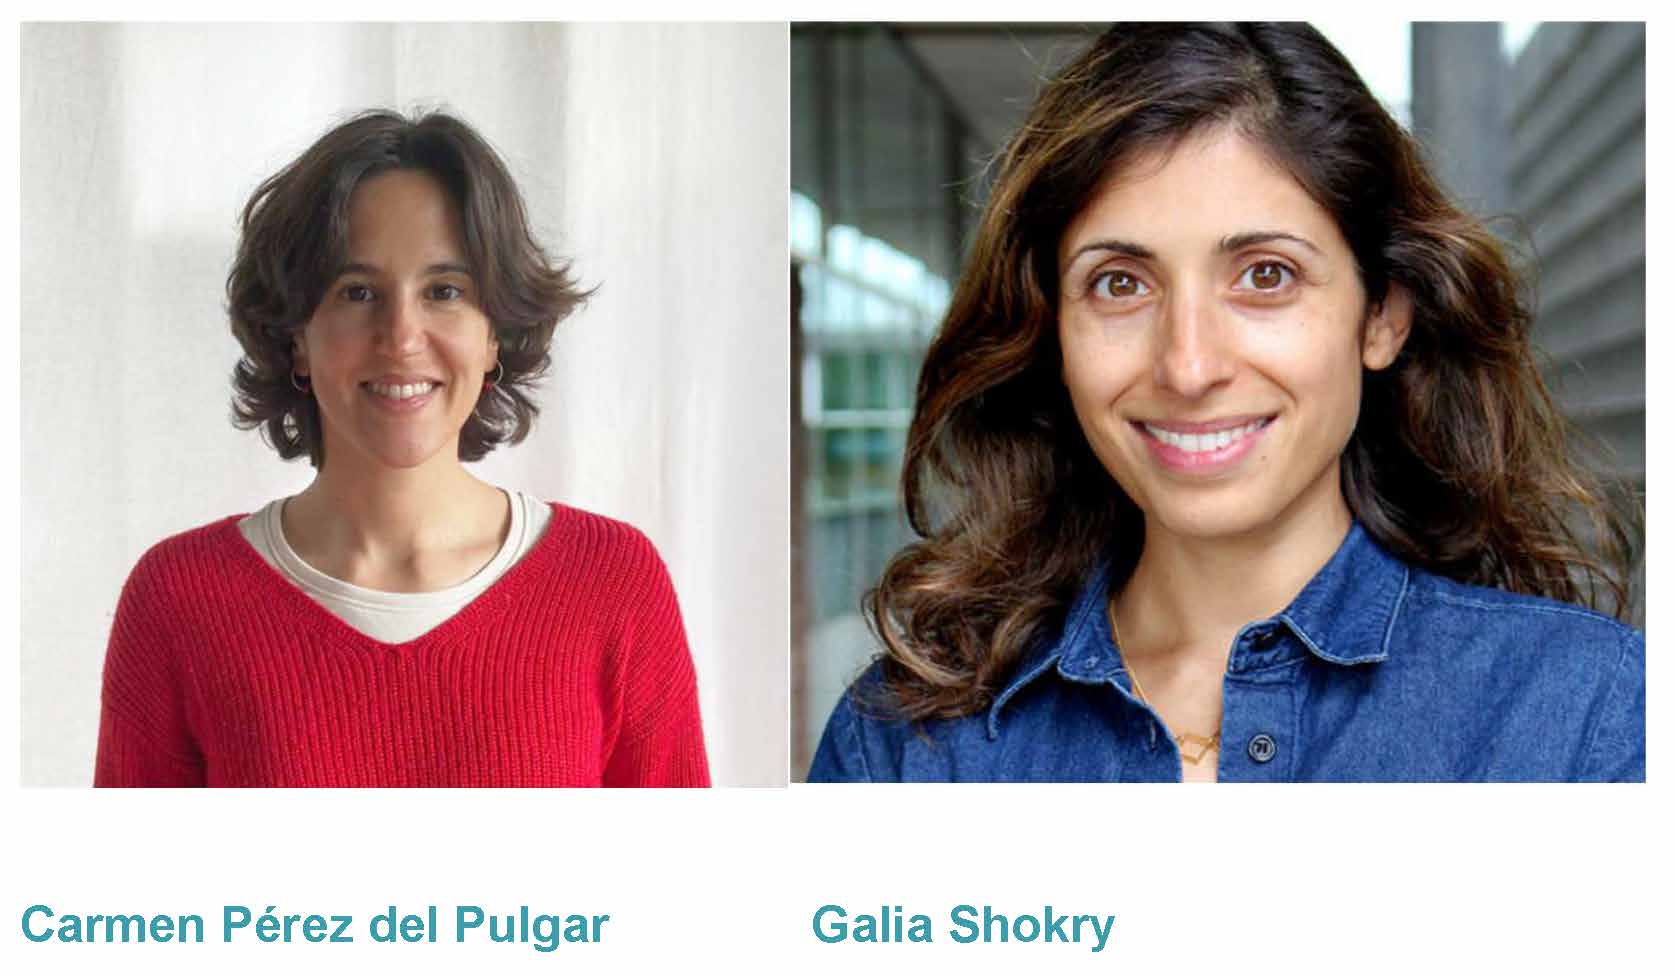 FEB 5th 2021_Carmen Pérez del Pulgar presents:  Do they always work towards children’s wellbeing? AND Galia Shokry presents: Vulnerability to future climate gentrification in the quest for a green resilient Philadelphia